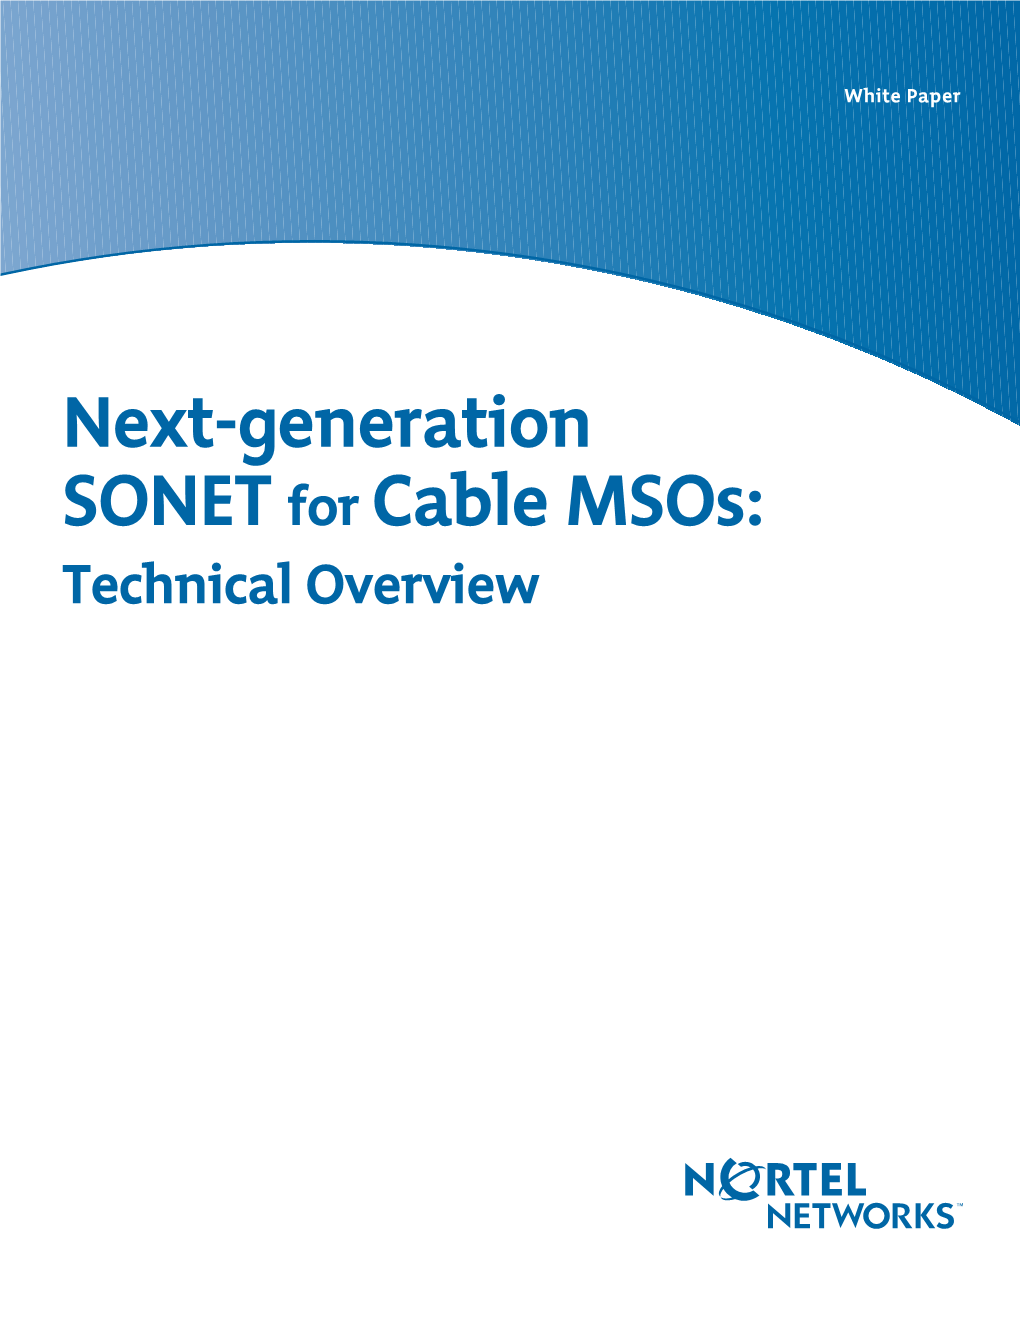 Next-Generation SONET for Cable Msos